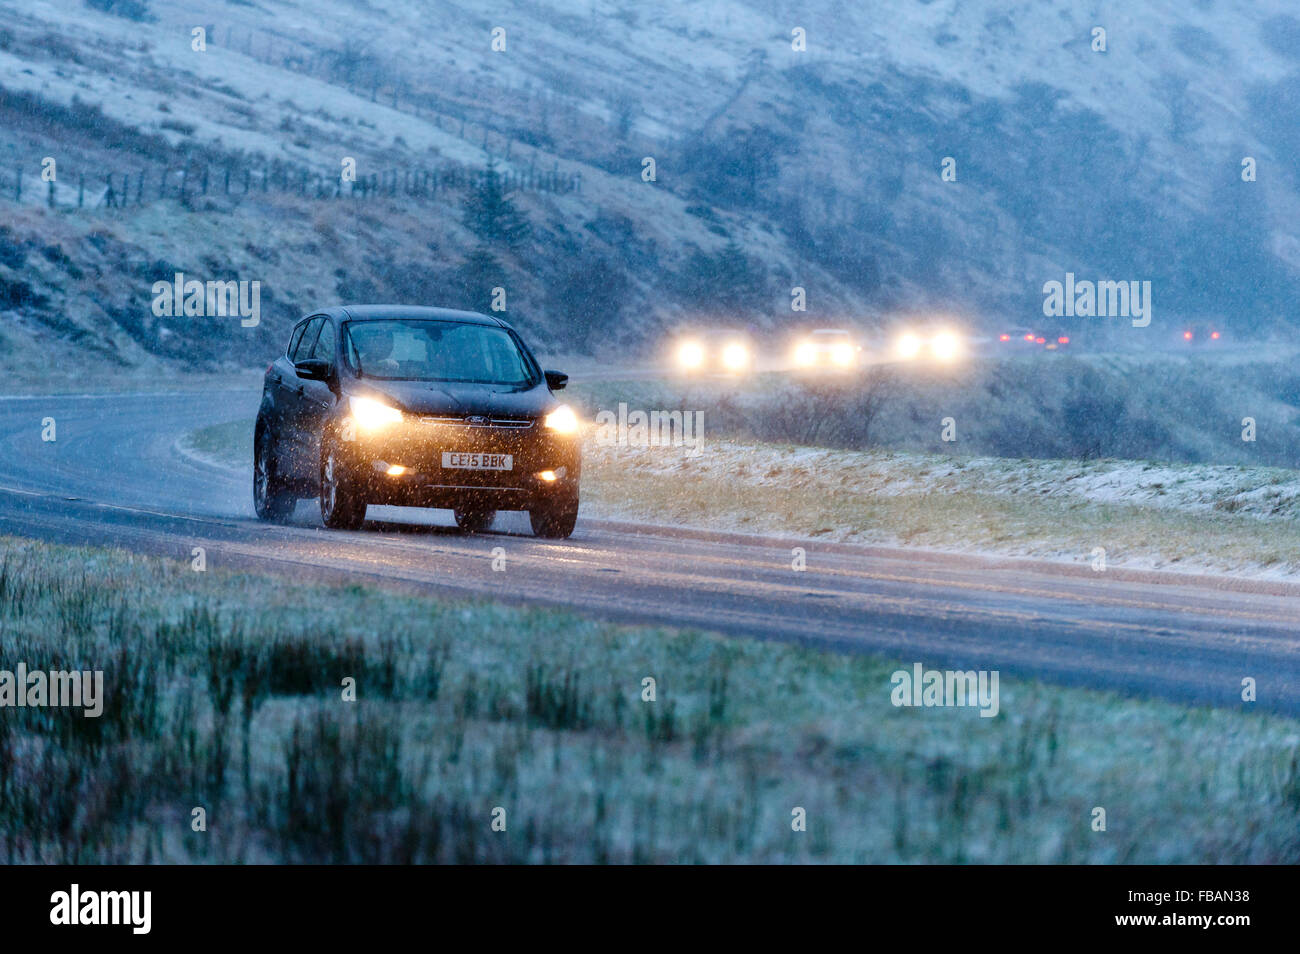 Brecon, Powys, Wales, UK. 13th January, 2016. Traffic negotiates the A470 road over the Brecon Beacons near the Storey Arms during a blizzard of sleet and snow. Credit:  Graham M. Lawrence/Alamy Live News. Stock Photo